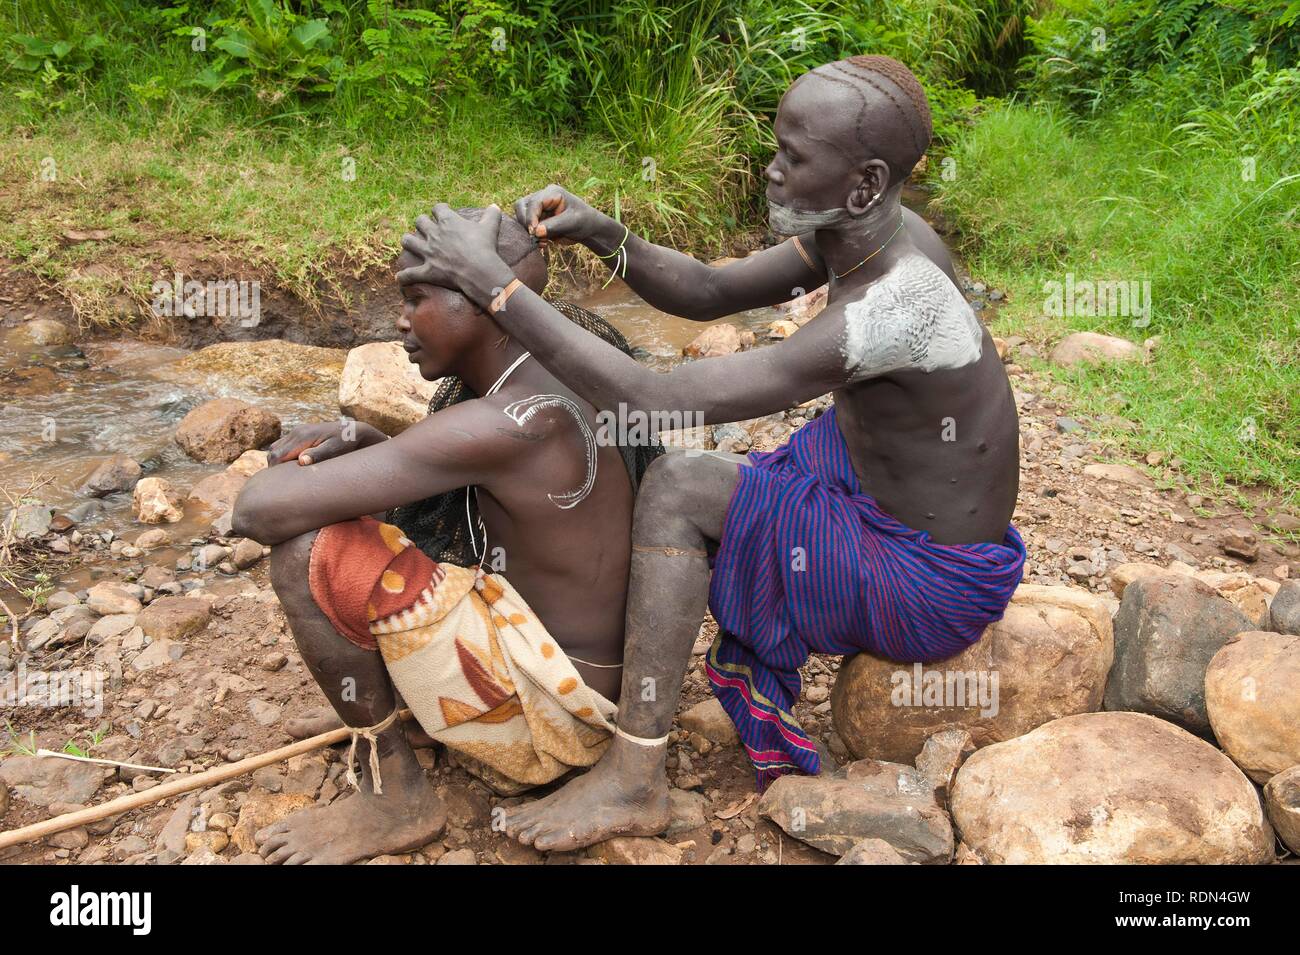 Surma man shaving his friends hair with a razor blade, Surma tribe, Tulgit, Omo River Valley, Ethiopia, Africa Stock Photo